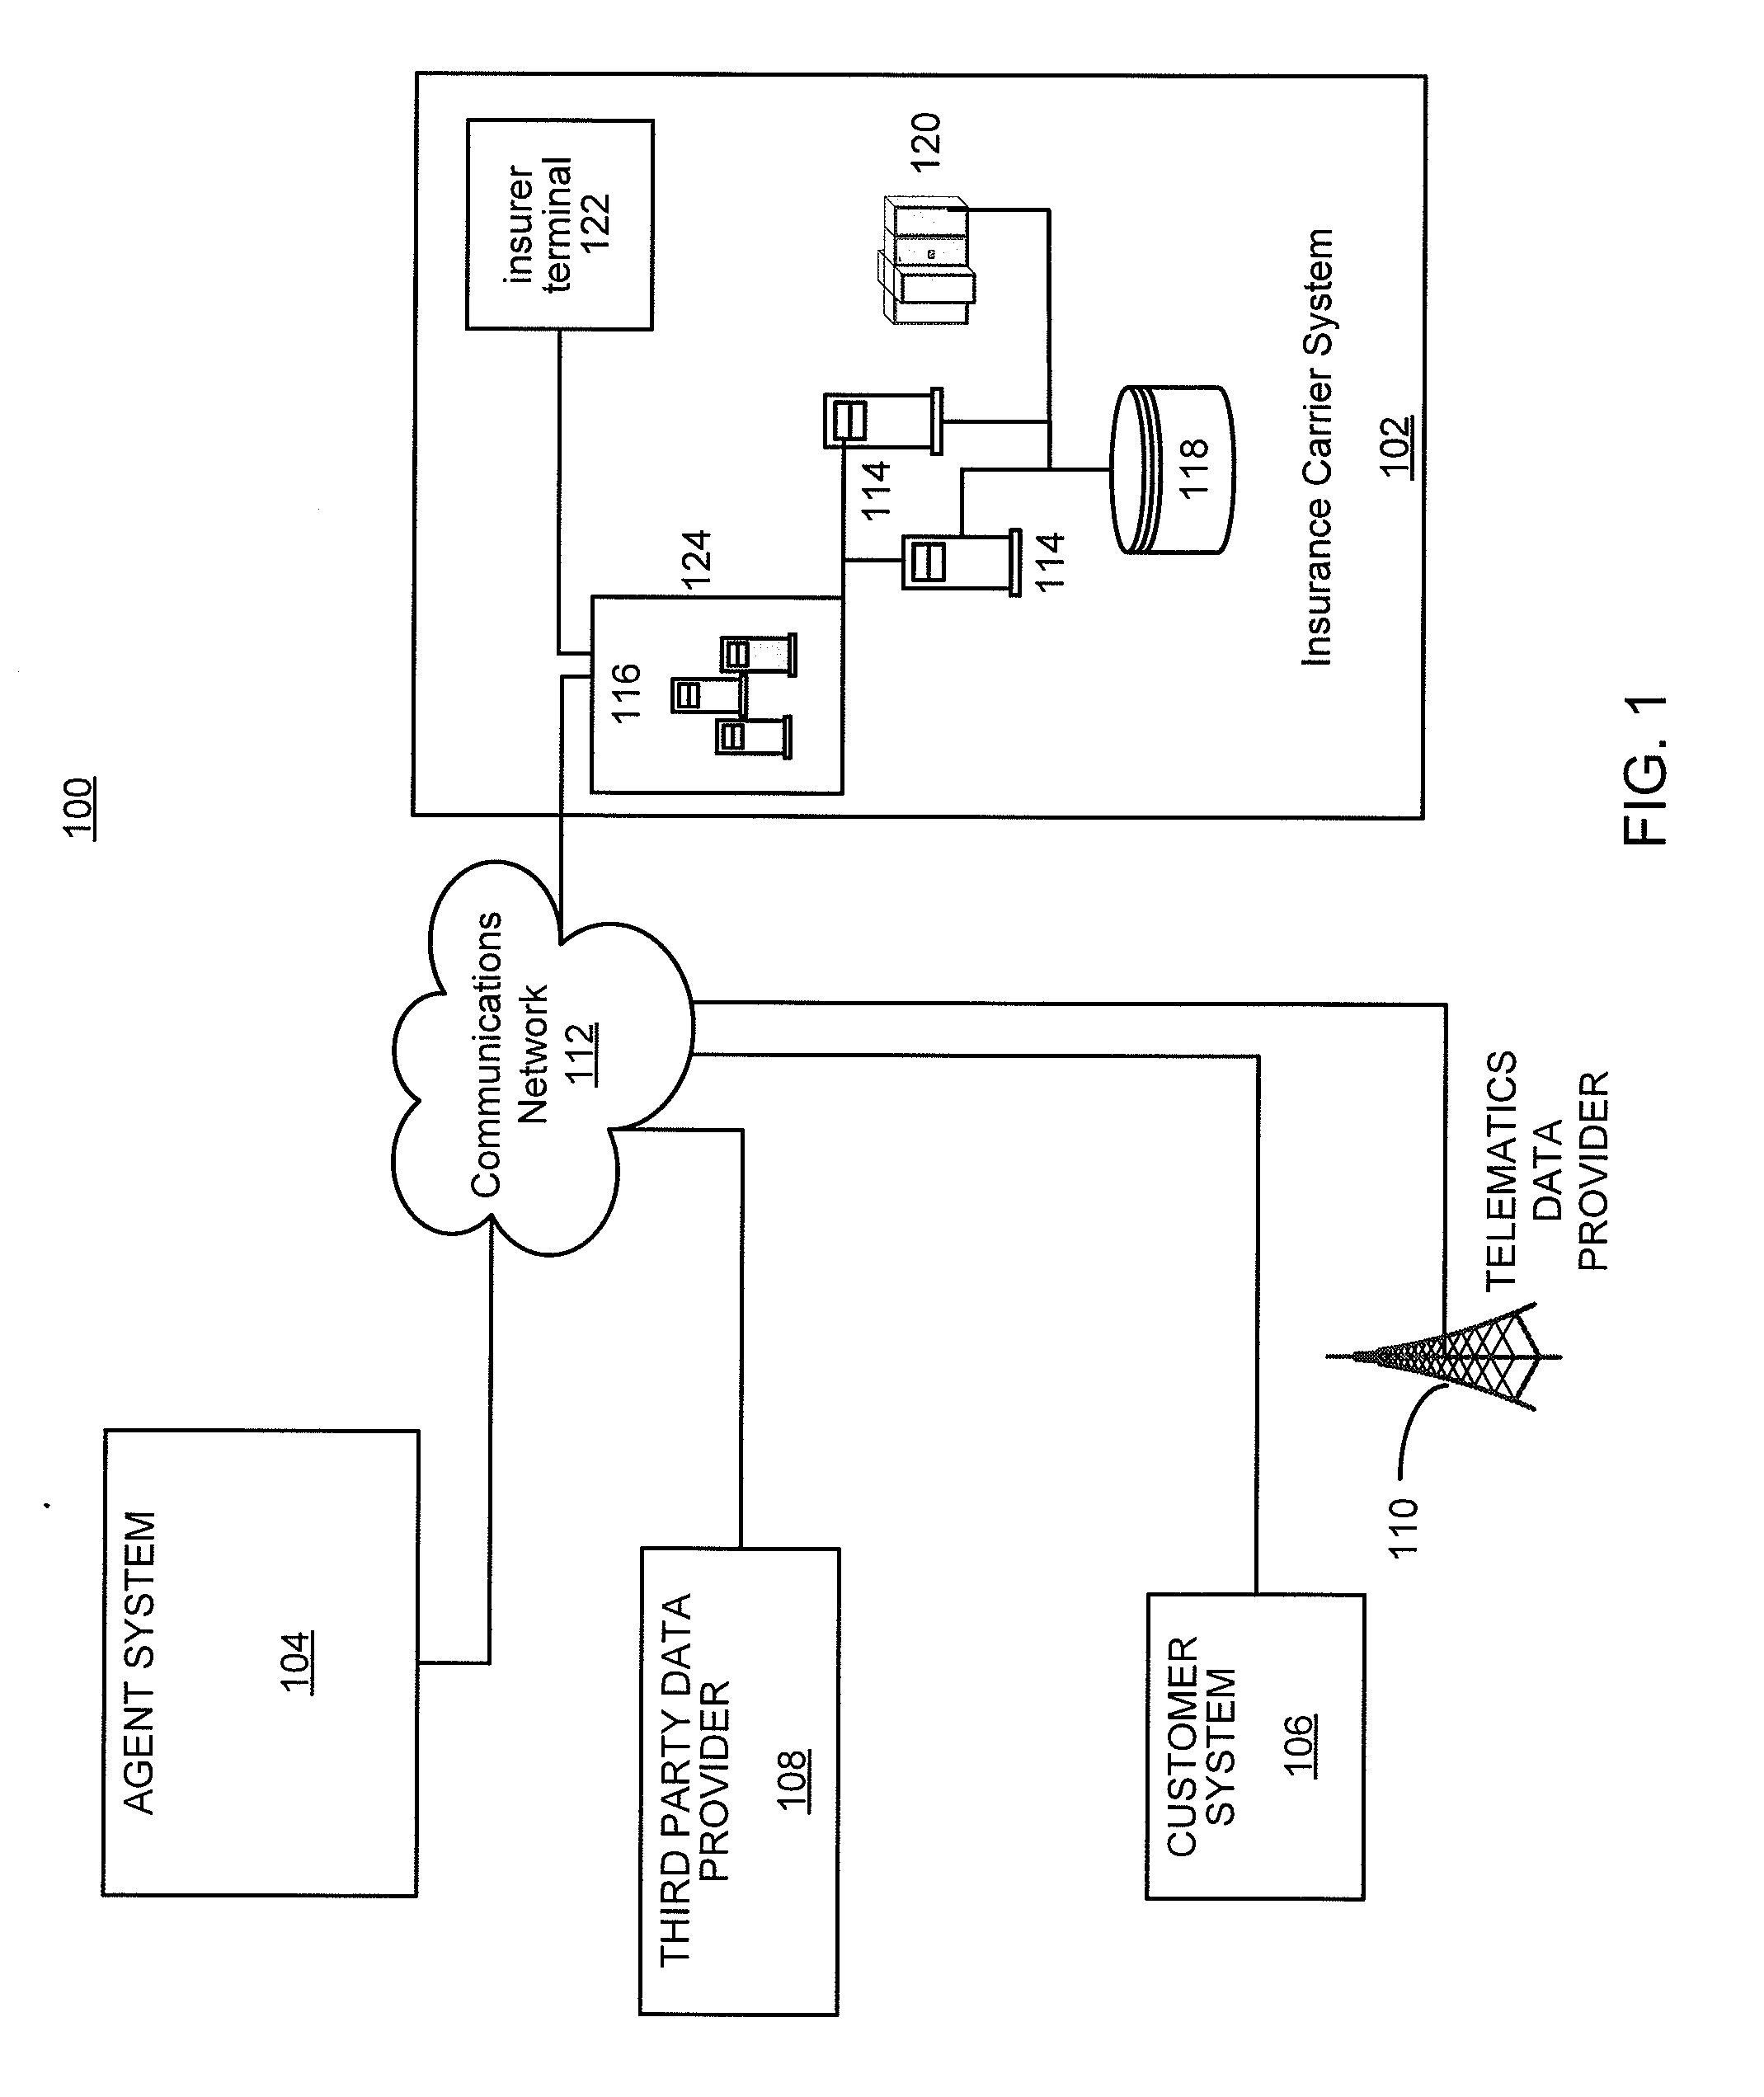 System and method for utilizing interrelated computerized predictive models